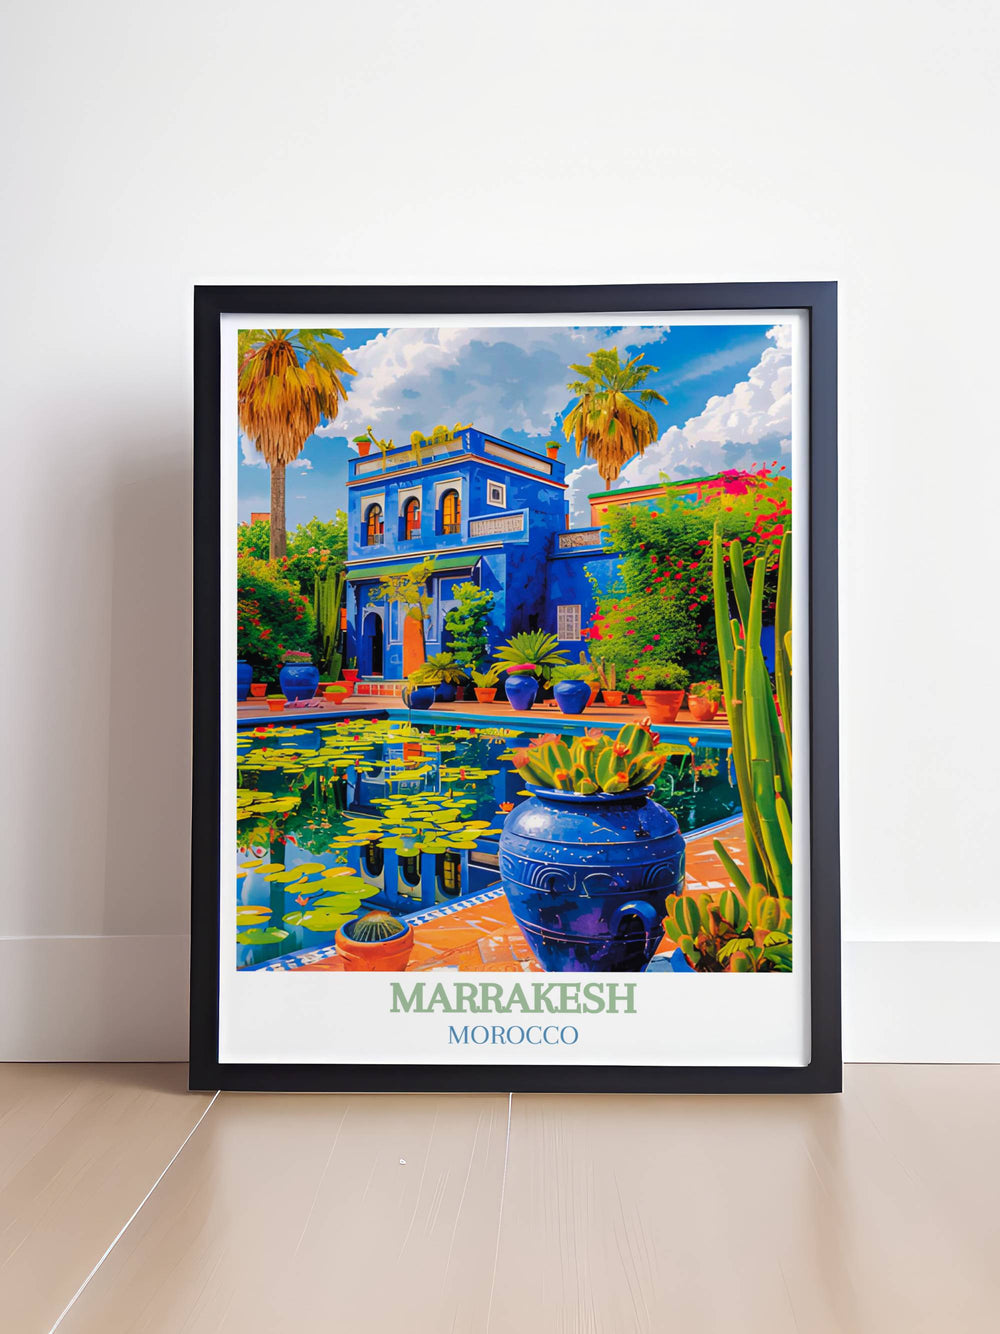 Majorelle Garden art print captures the tranquil water features surrounded by exotic plants and vibrant flowers, embodying the gardens peaceful atmosphere.